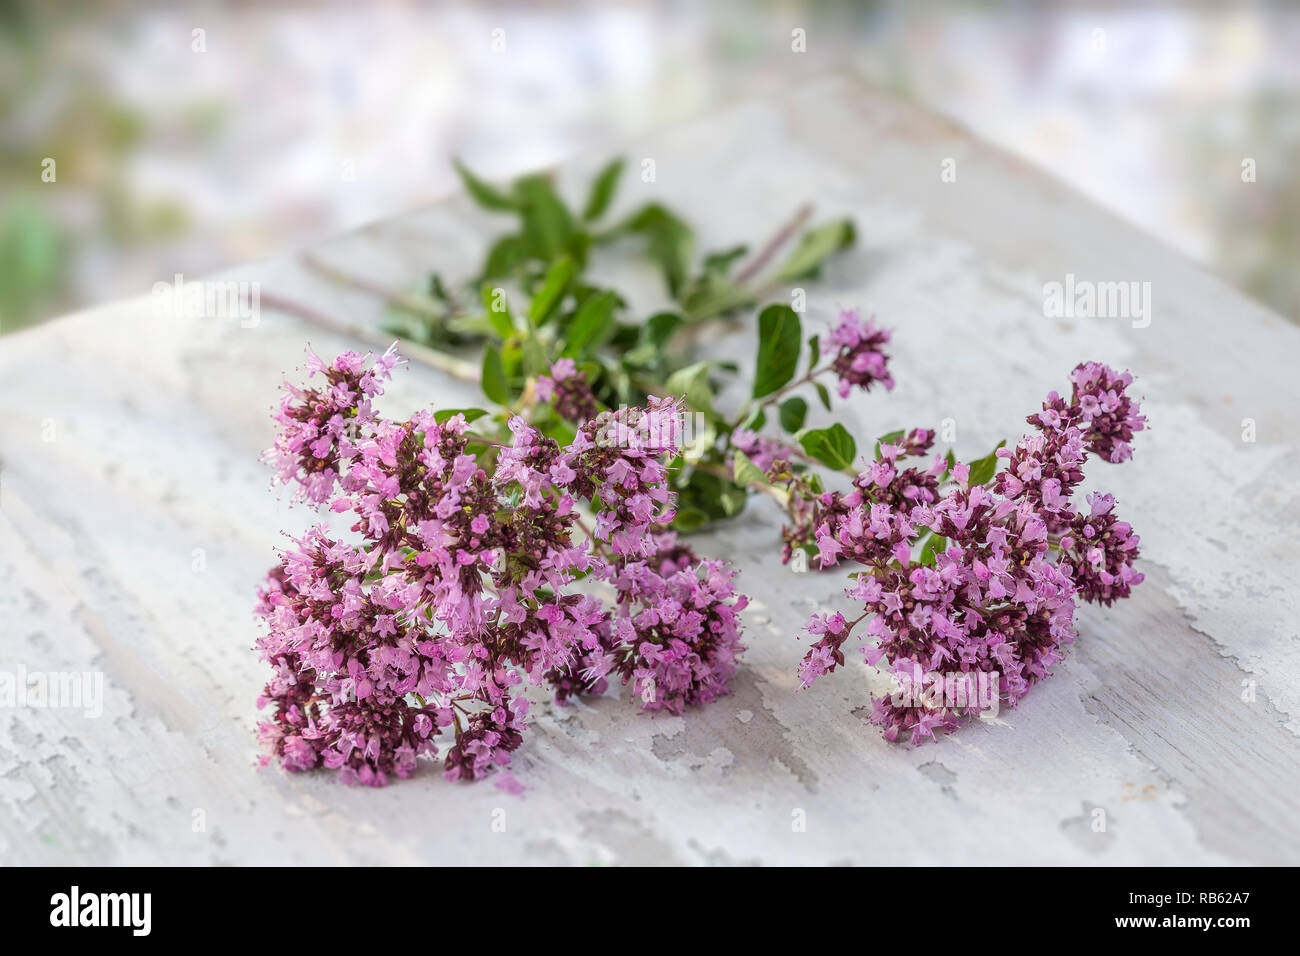 Bunch of fresh Oregano twigs with flowers on wood. Pink flowers bouquet of origanum vulgare. Stock Photo